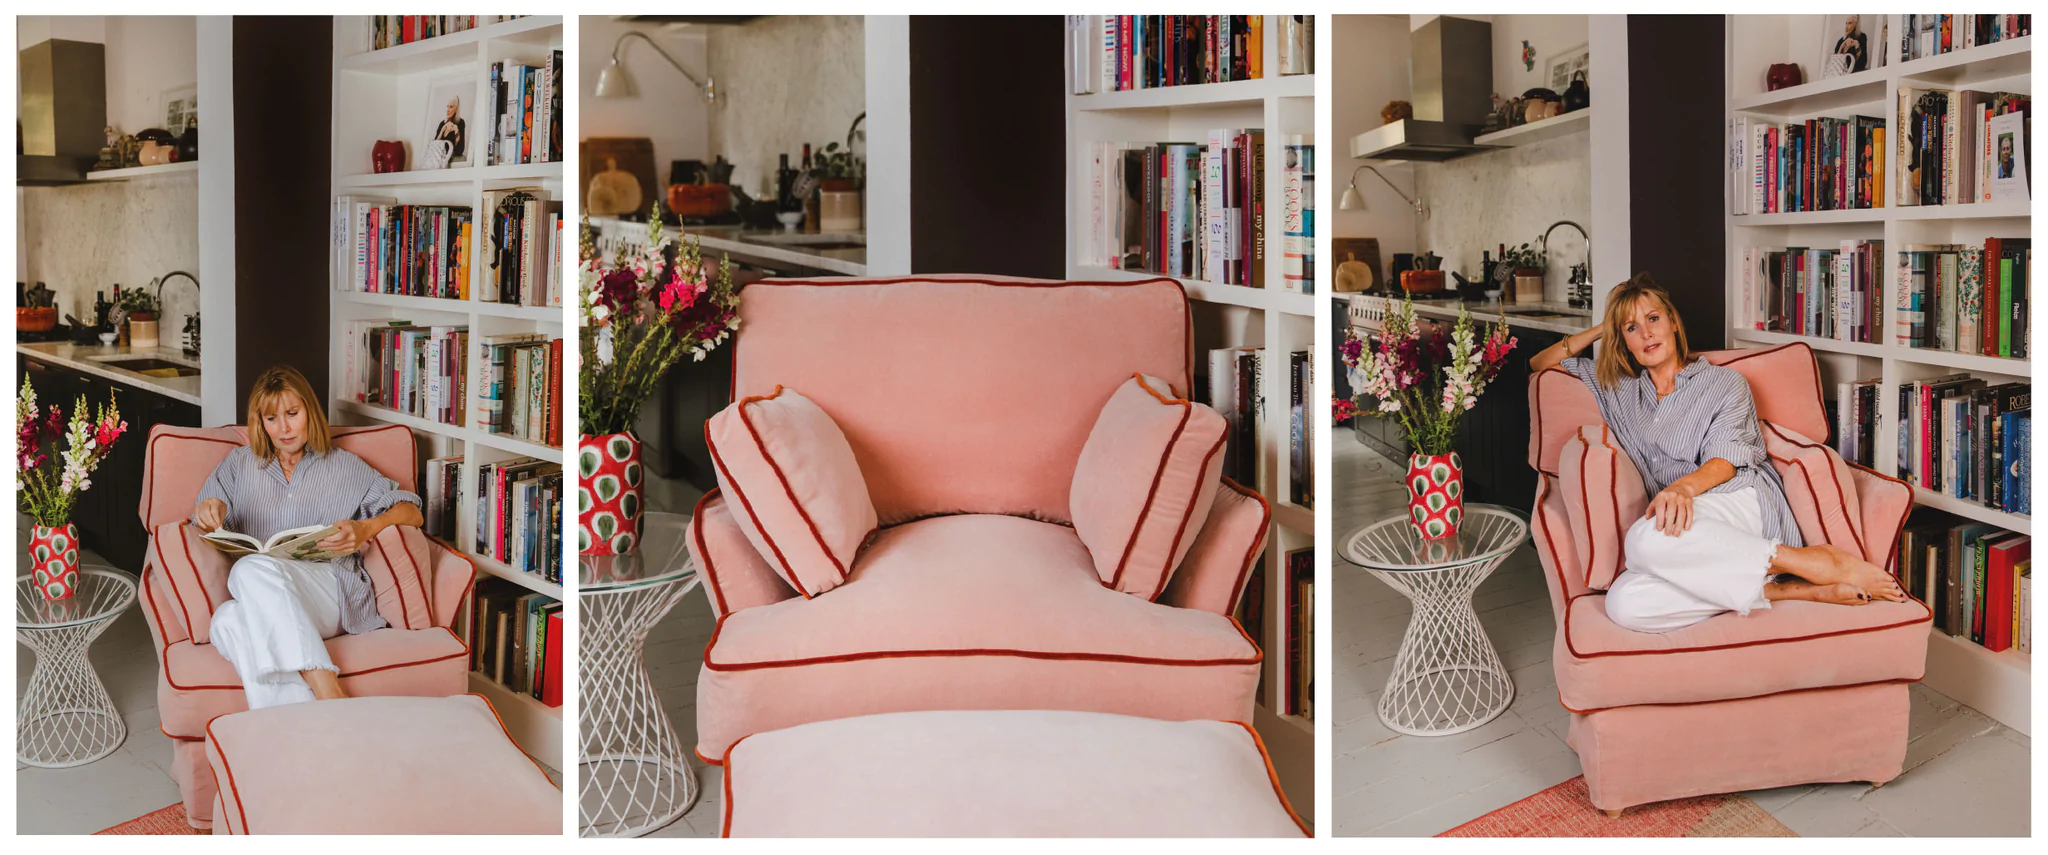 Skye Gyngell curled up reading in her Plaster Pink Velvet, Otter Box, Little Armchair with Paprika Contrast by Maker and Son